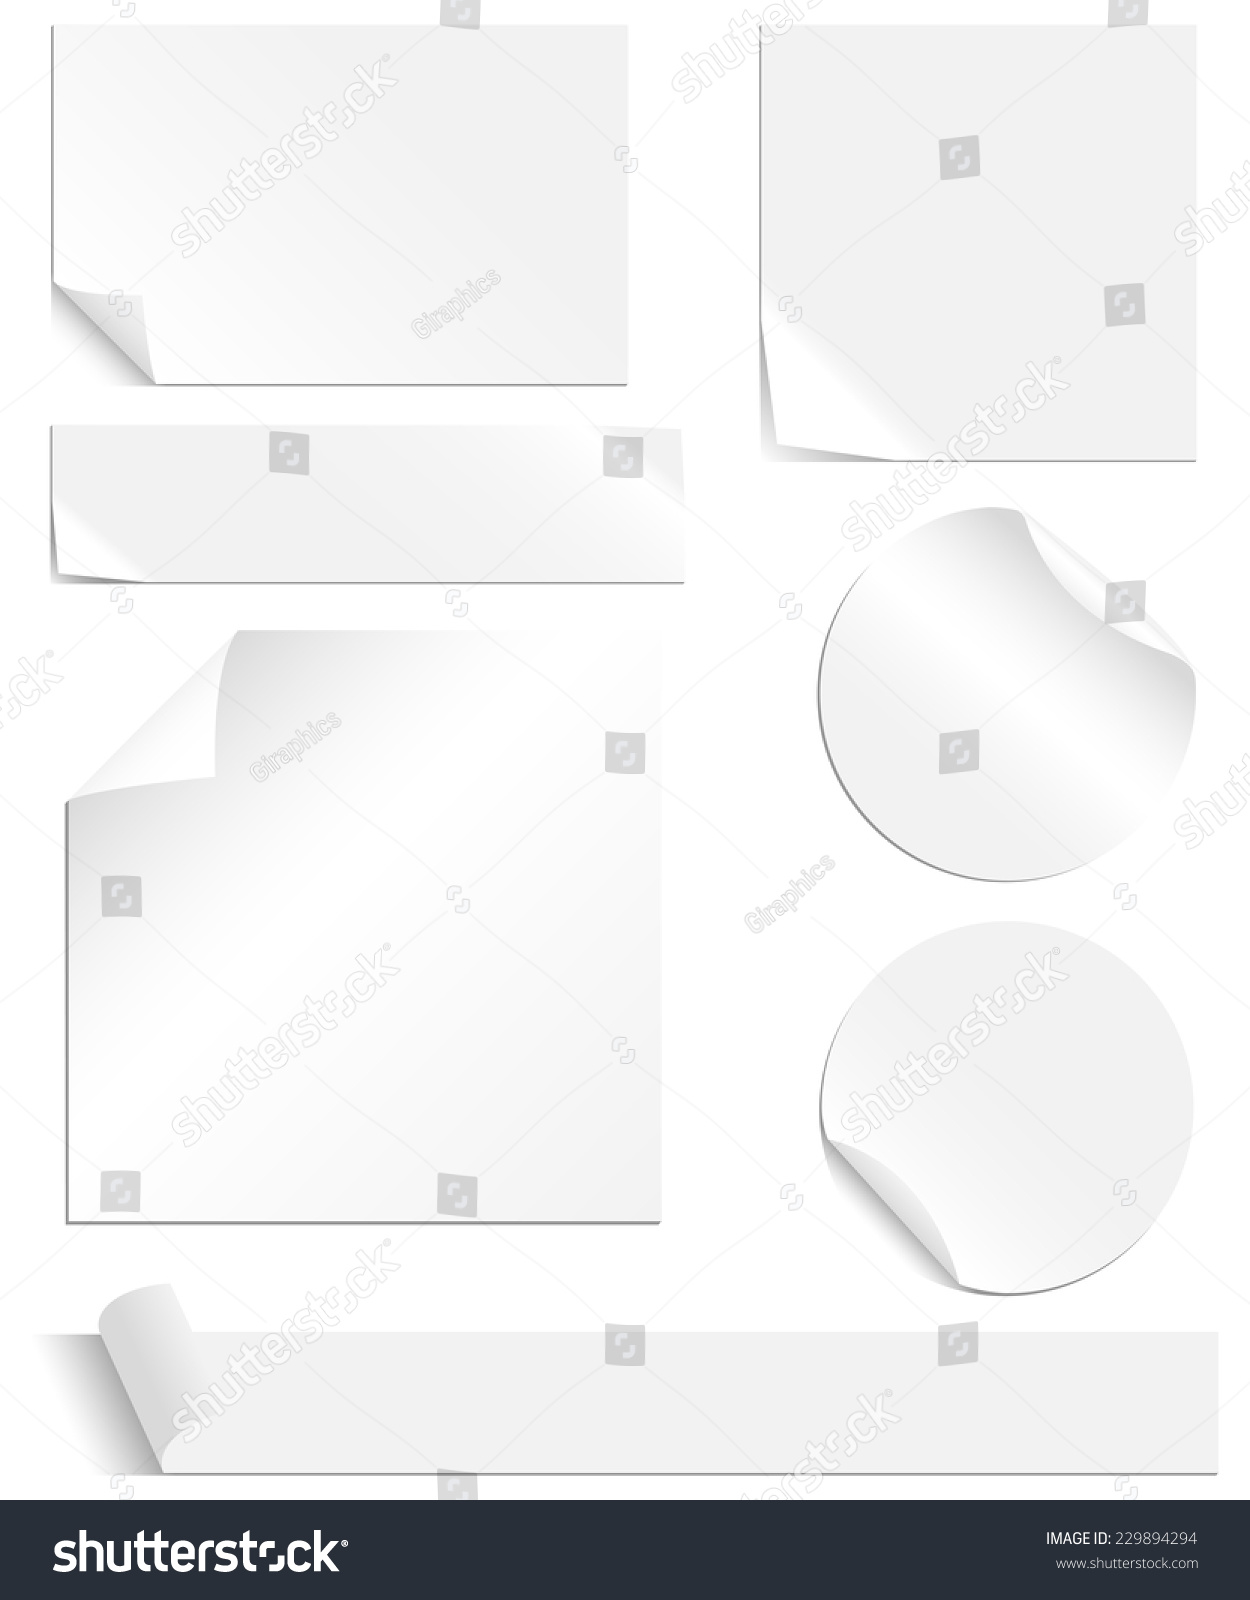 White Labels Set - Collection of blank labels with peeling and creased corners. Each element is grouped individually for easy editing. Colors are global swatches, so they can be changed easily. #229894294